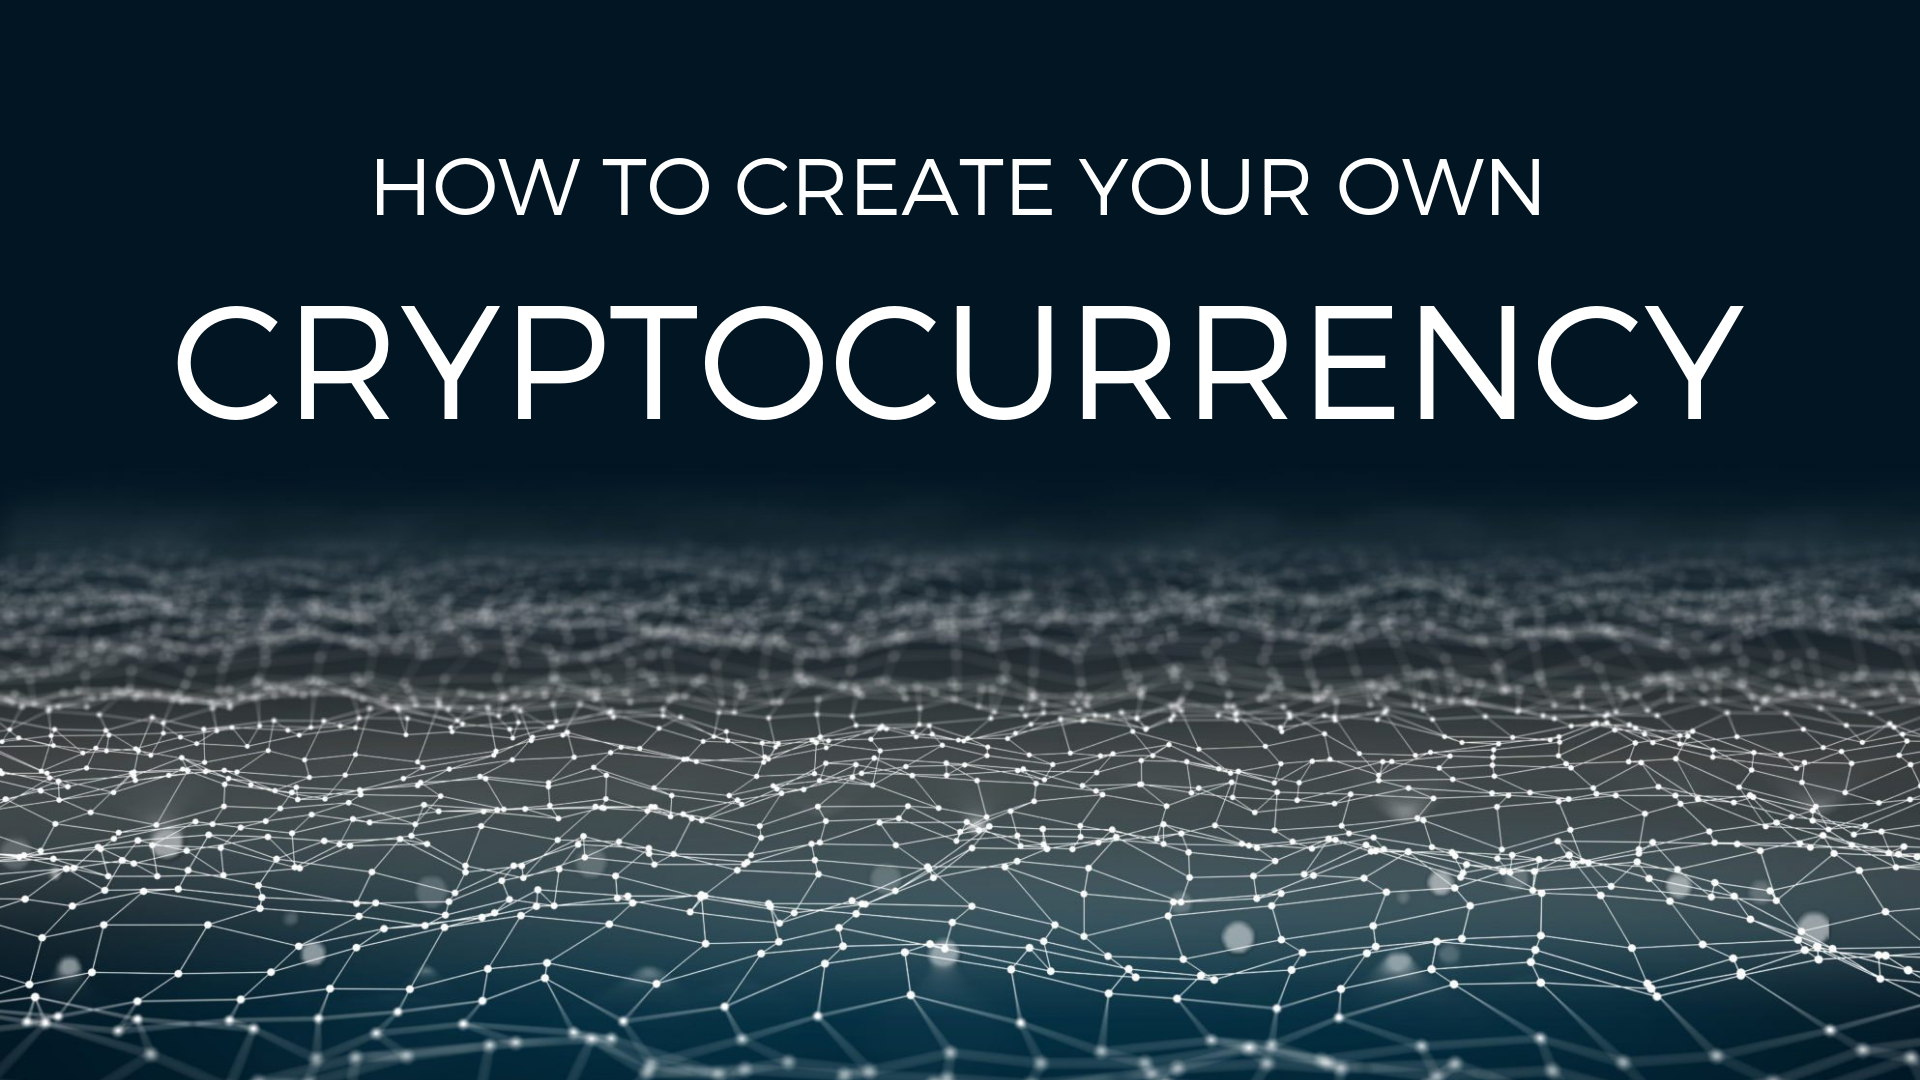 How To Create Your Own Cryptocurrency?